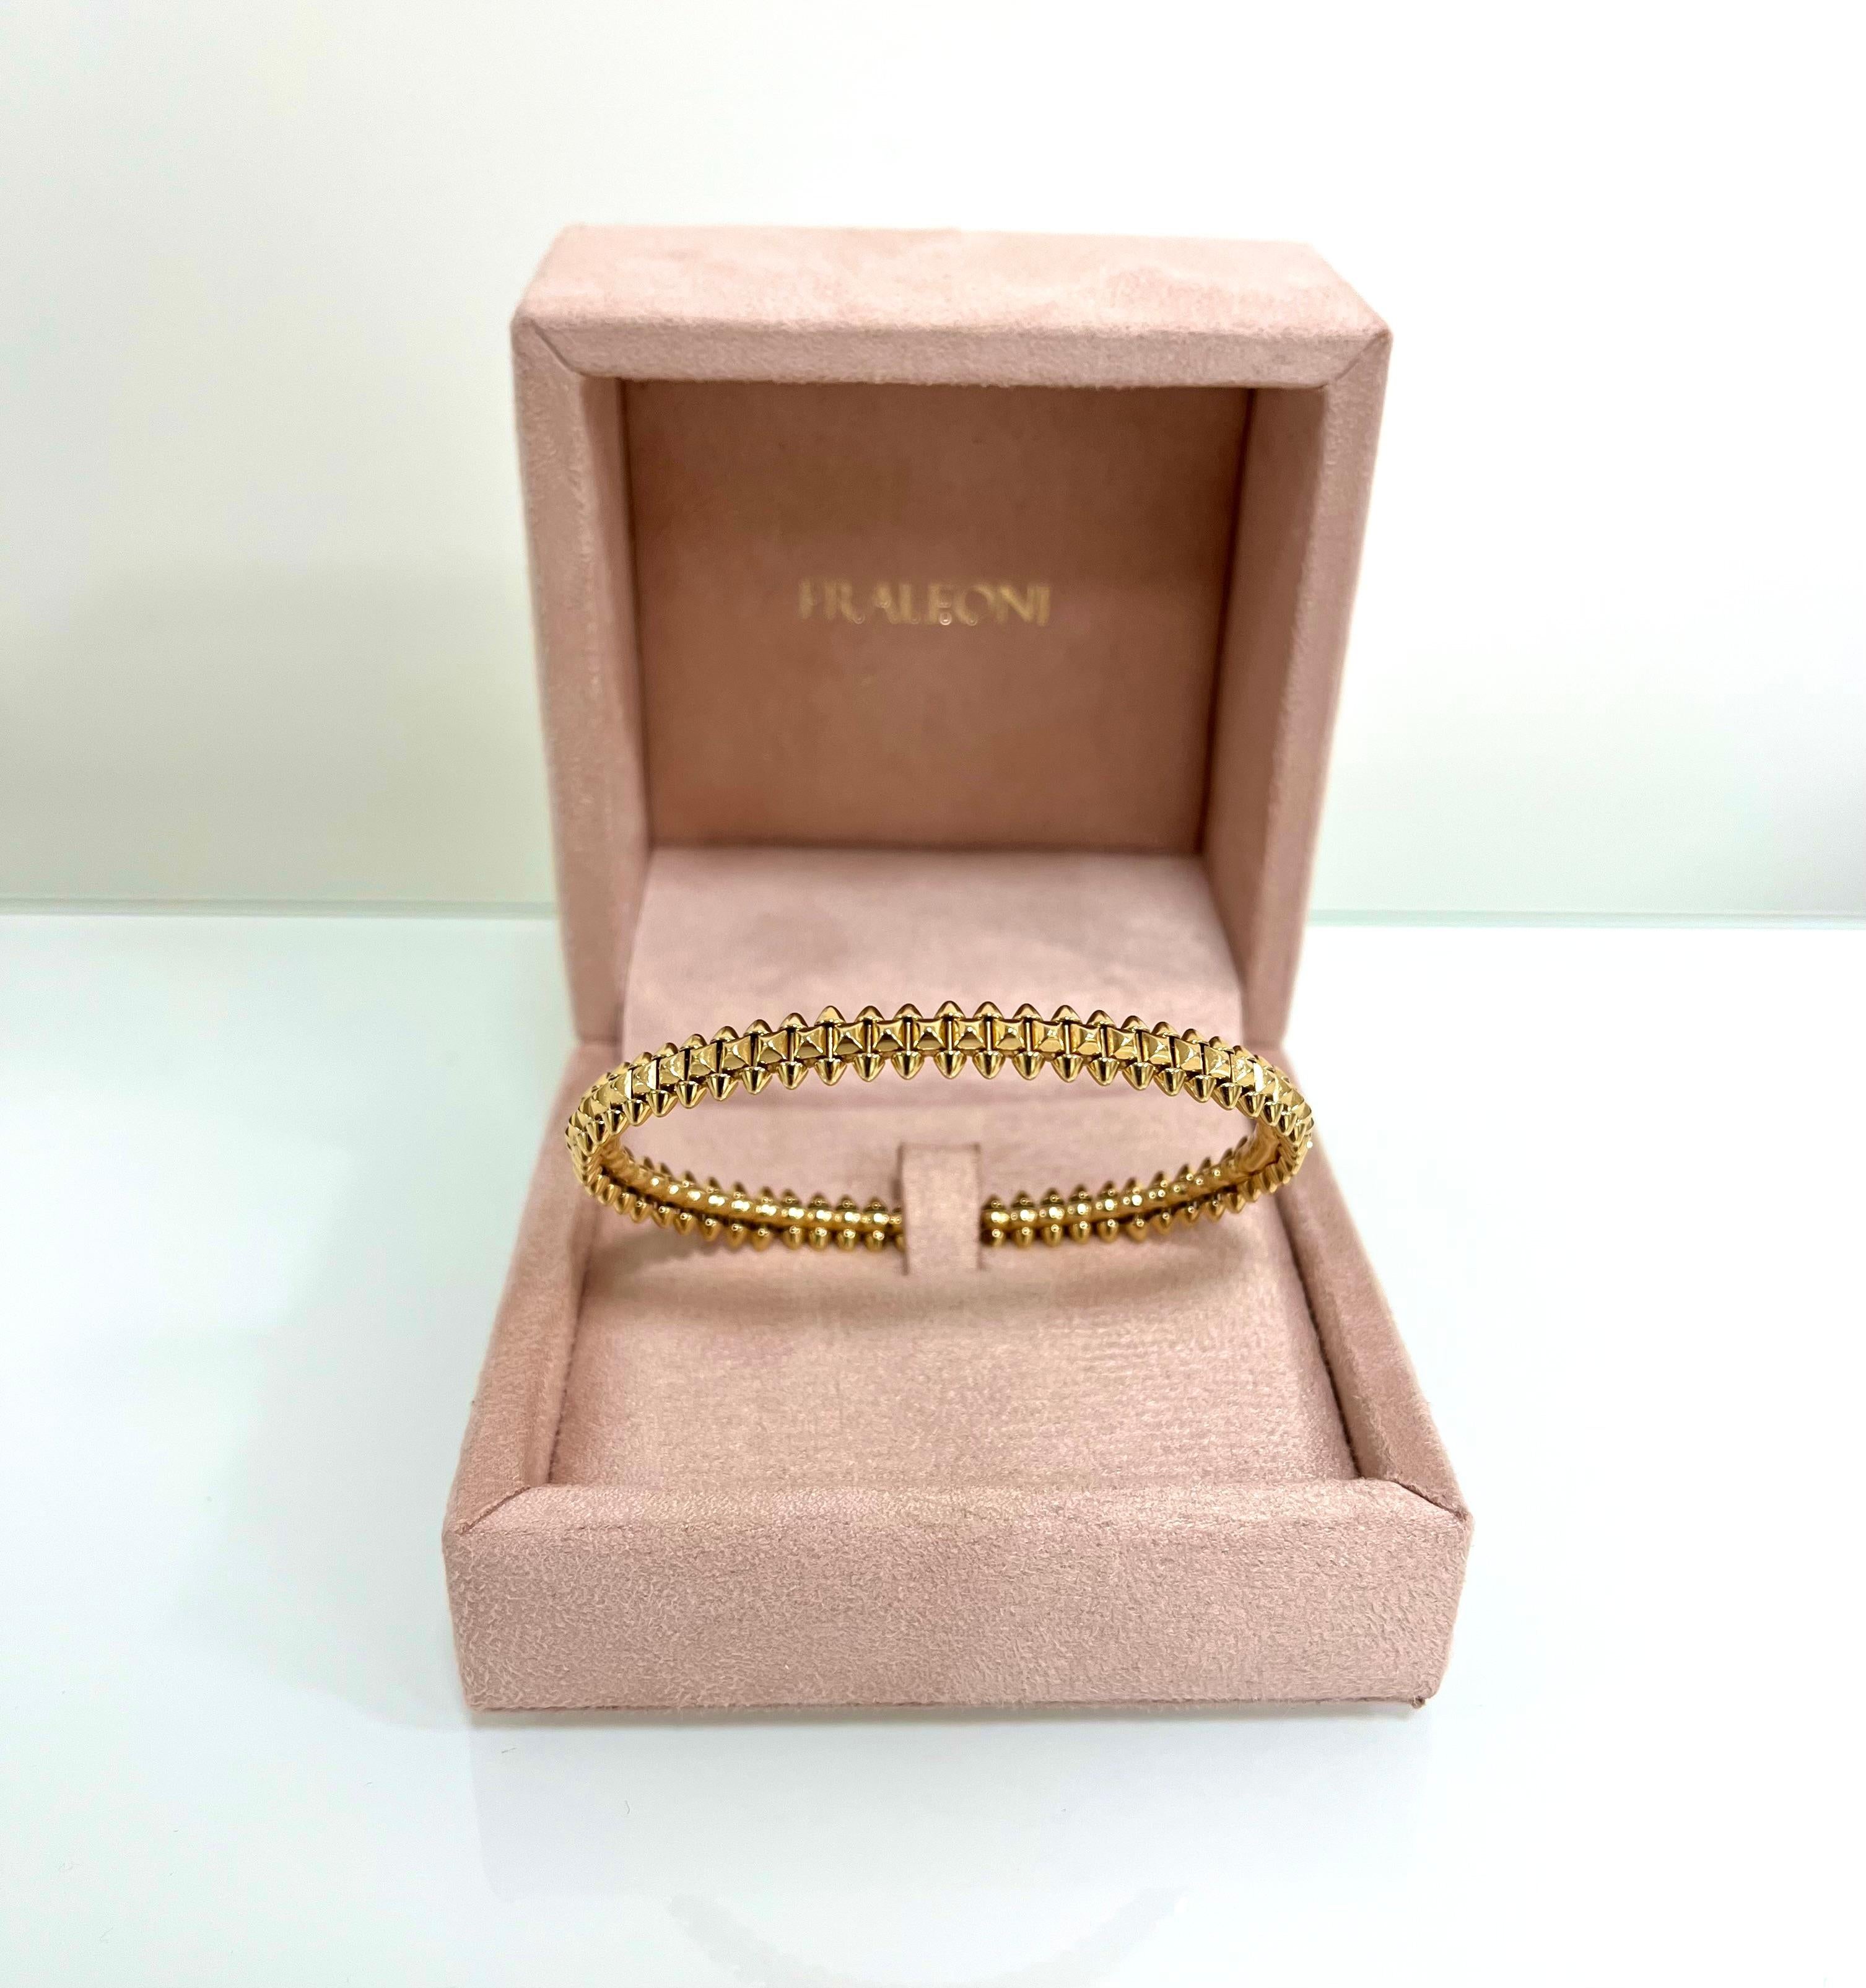 Clash de Cartier 18 kt. yellow gold bangle.
This modern bracelet is perfect on every occasion.
The signature row of clou carré studs is the striking backbone of the collection.
Width: 6.2 mm.
Weight: gr. 28.50
Inner circumference: 5.10 cm.
Cartier